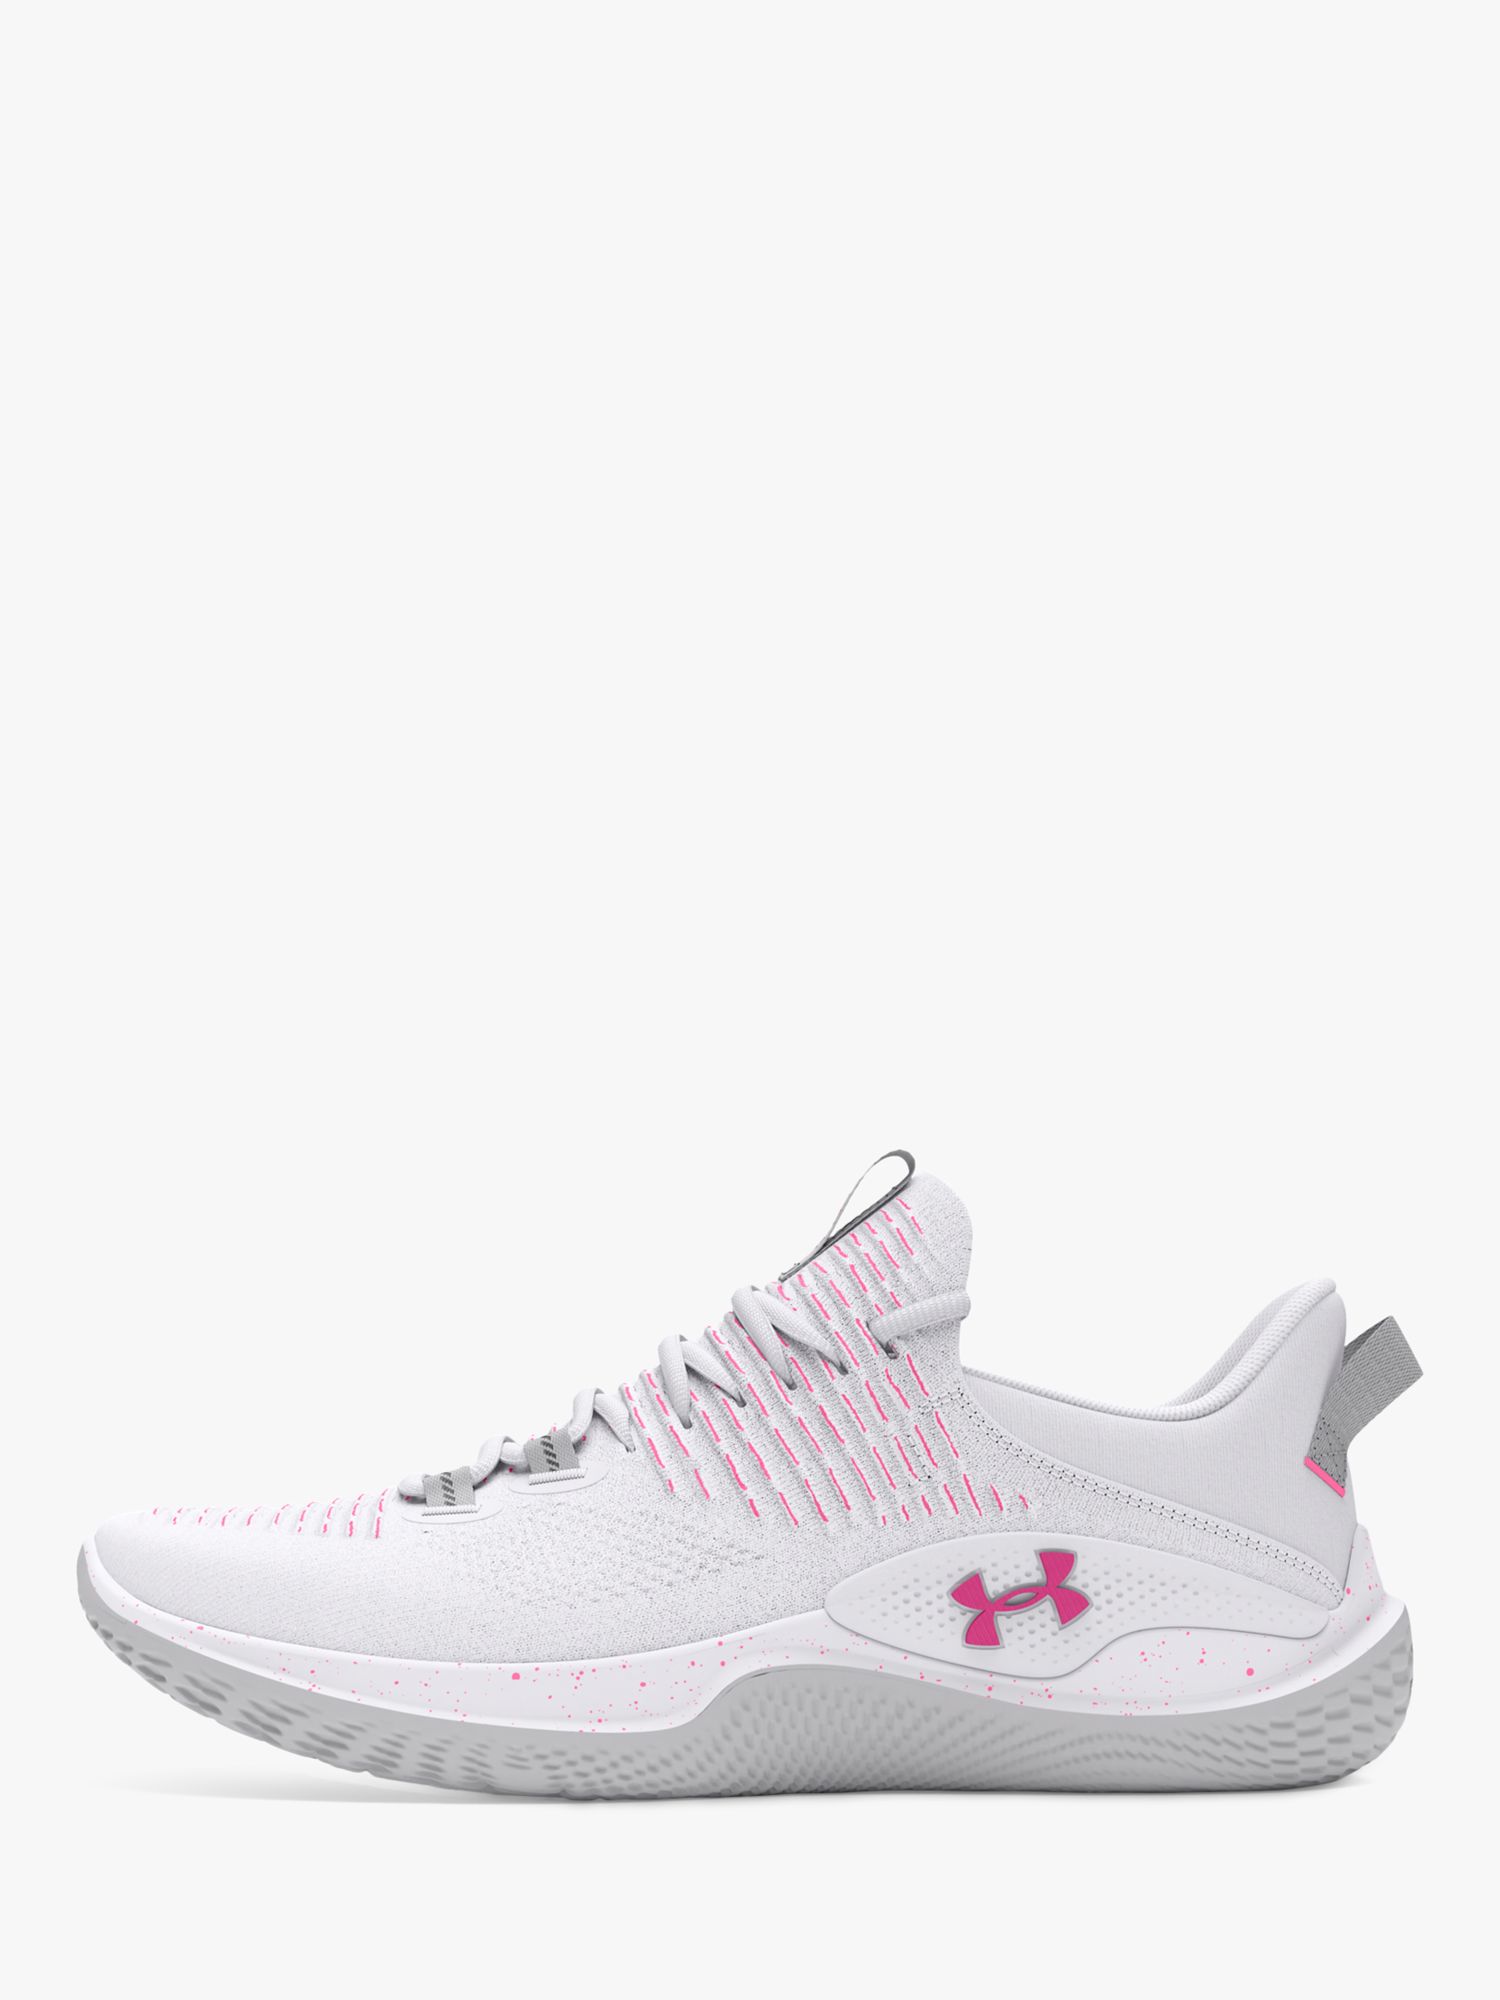 Under Armour Flow Dynamic Women's Training Shoes, White/Grey, 5